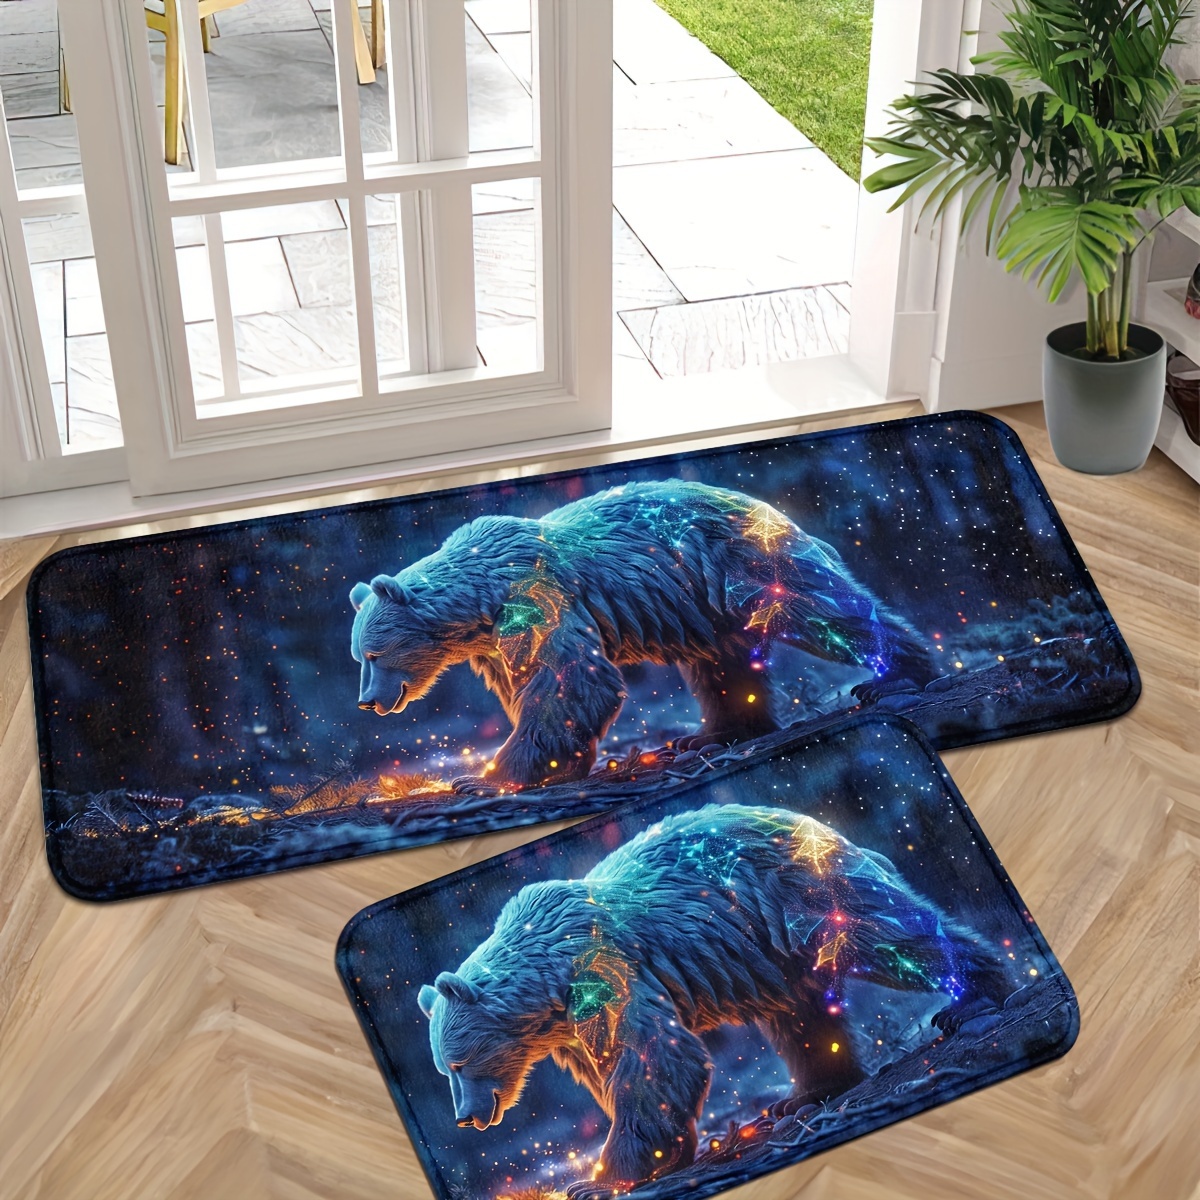 

Starlight Forest Bear Polyester Door Mat Set - Non-slip, Washable, Machine Made Indoor Entrance Mats For Entryway, Kitchen, Bathroom, And Laundry Room - Thicken Carpet Runner Rugs